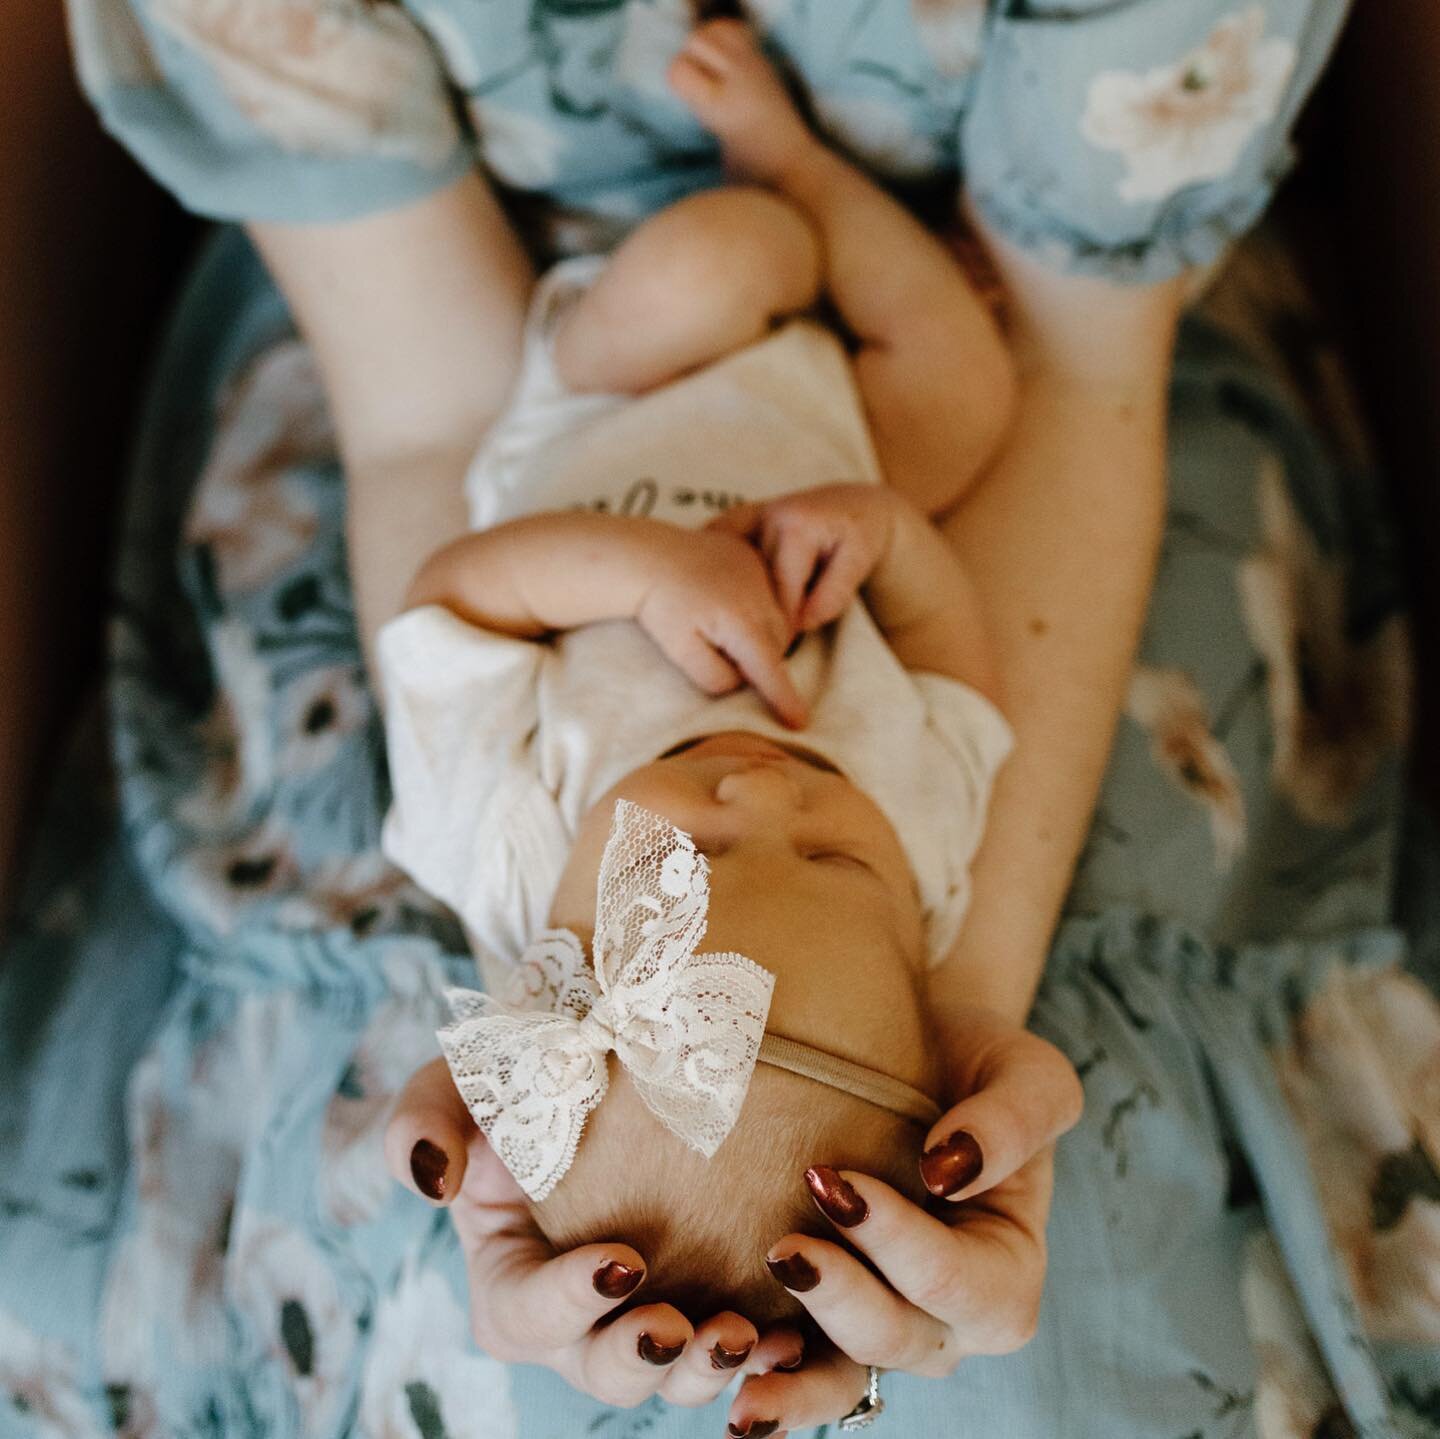 We are so excited to be walking for life again this year with the newest addition to our family - our daughter Everleigh, born May 9th.&nbsp;Experiencing the wonderful mystery of pregnancy, birth, and a few weeks of motherhood has given me a new unde